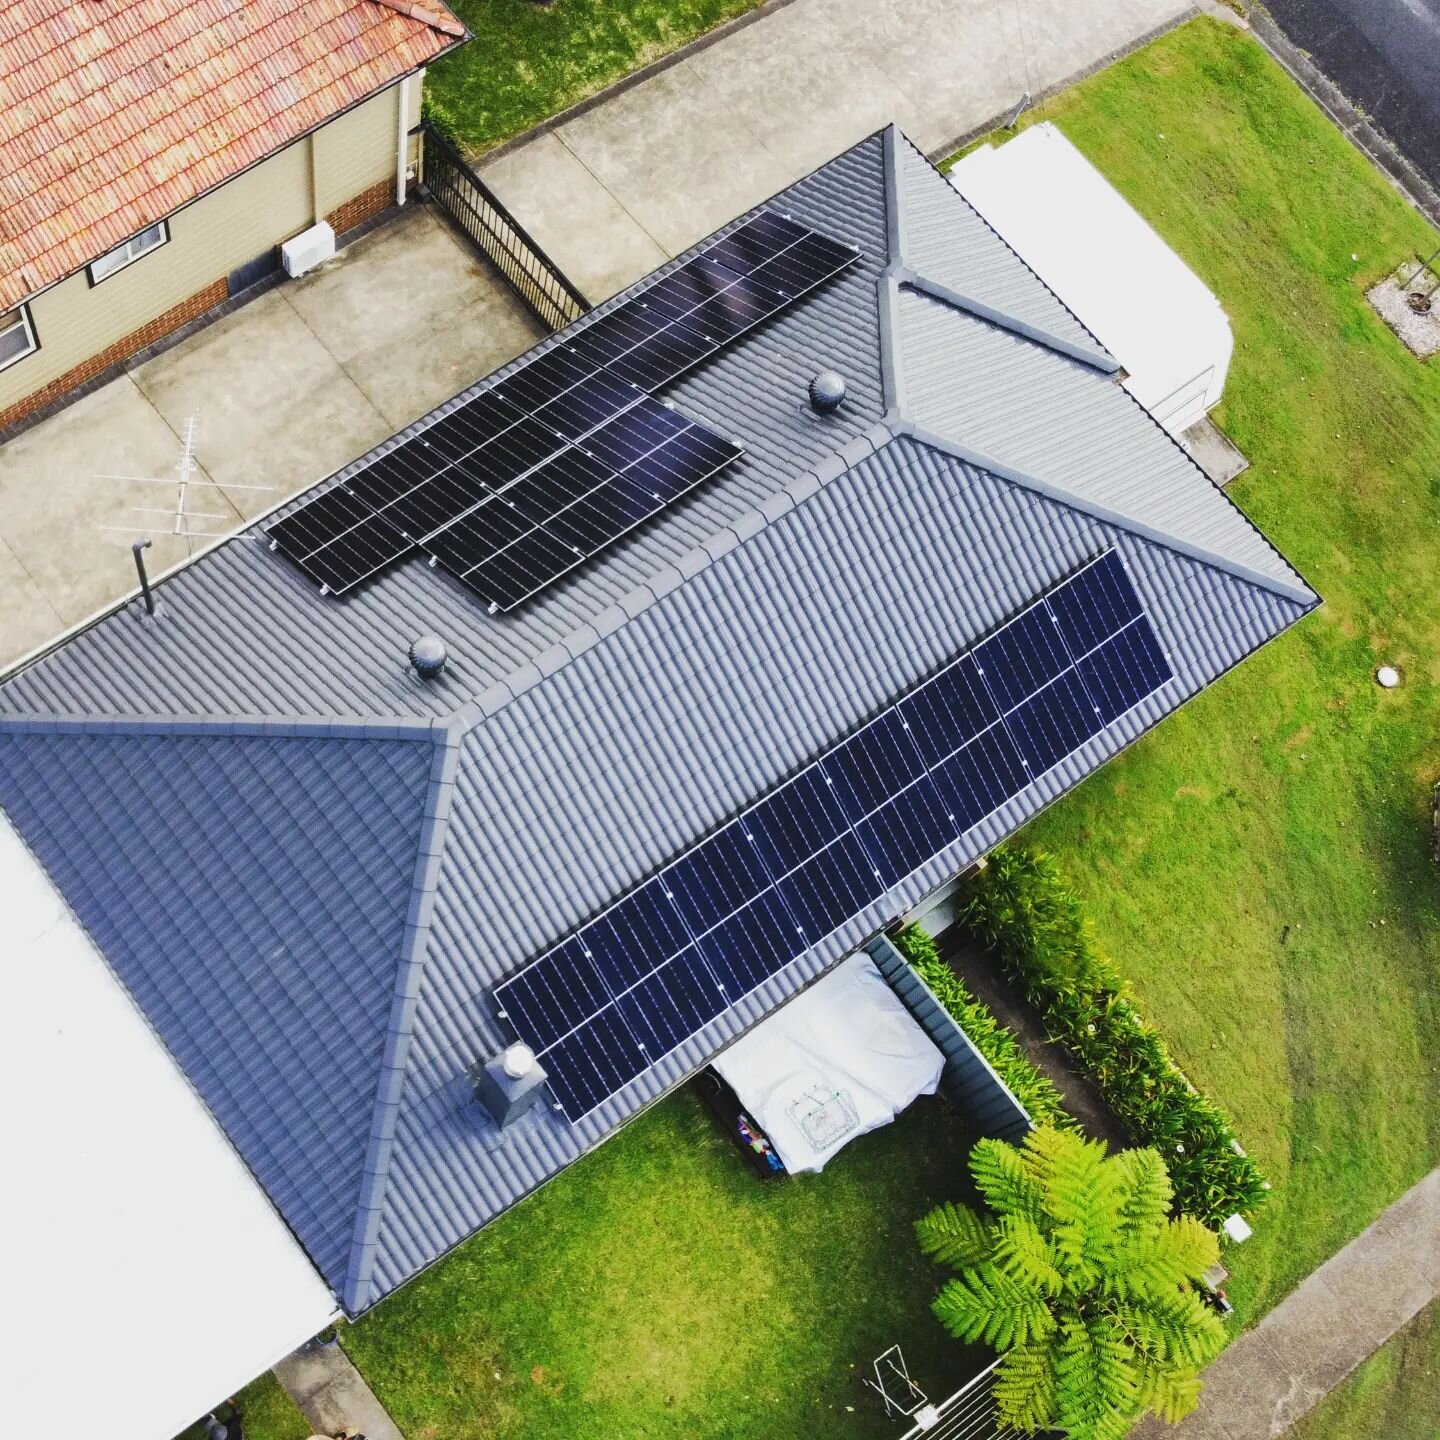 Today's 7.92 kw solar system at Wallsend. 
If you have a tight roof space these 440W Jinko panels offer a great power to footprint ratio, so you can maximize your solar savings.